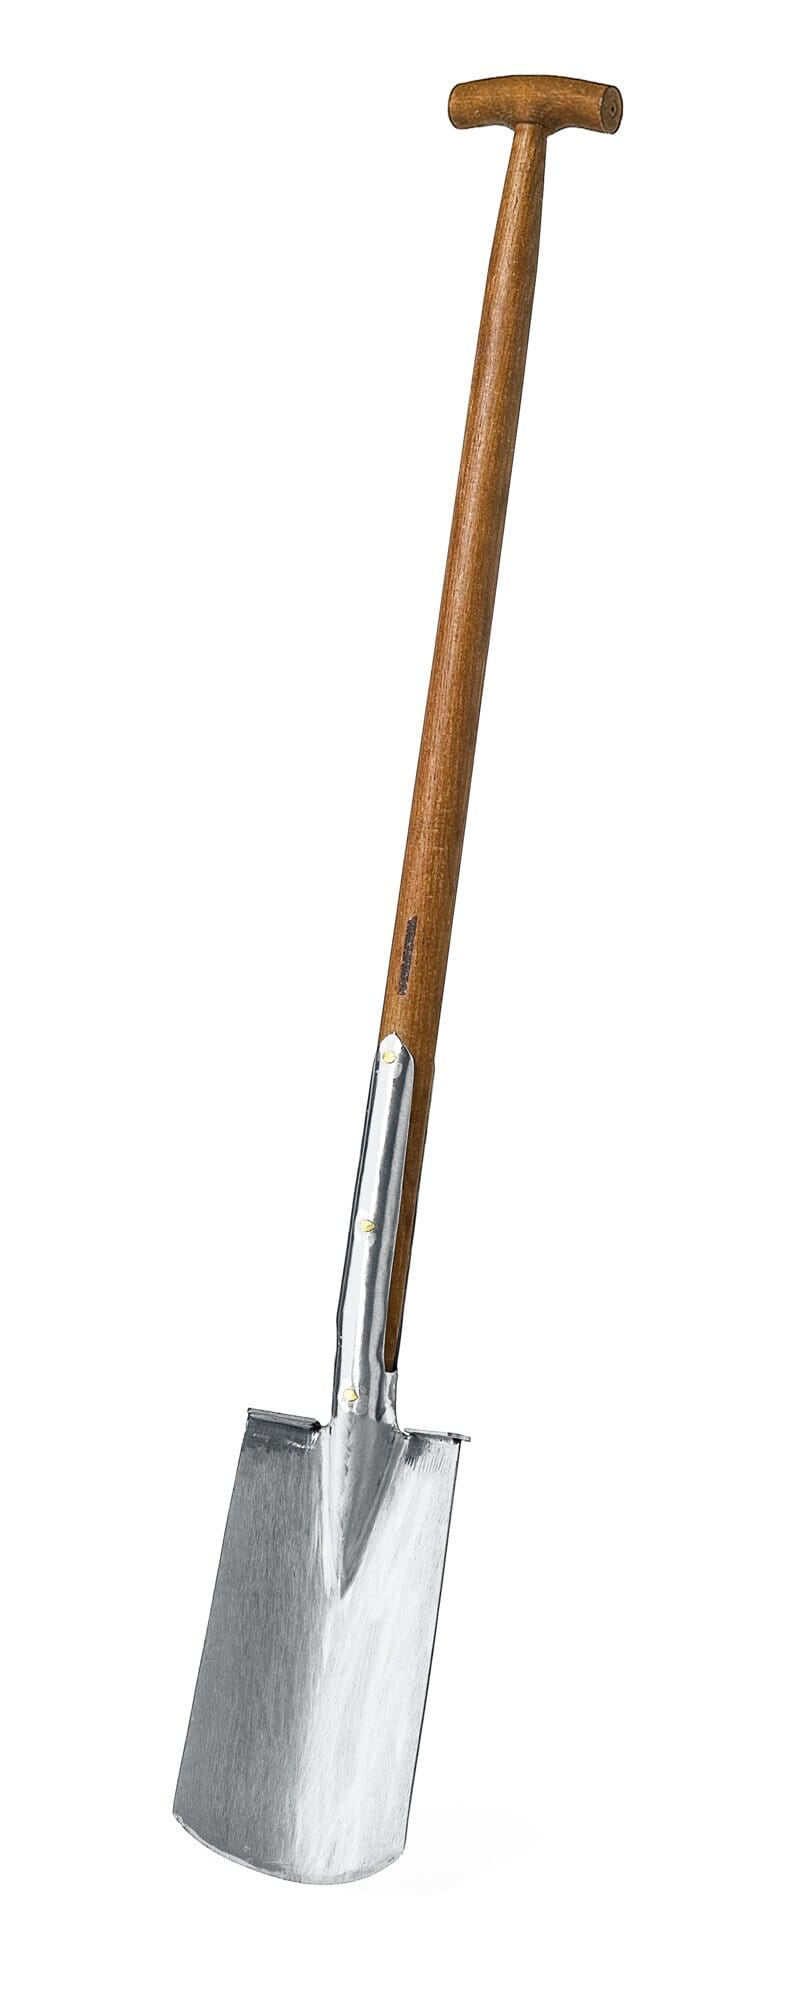 English Garden 41"D Handle Stainless Steel Digging Spade Less Vibrations 